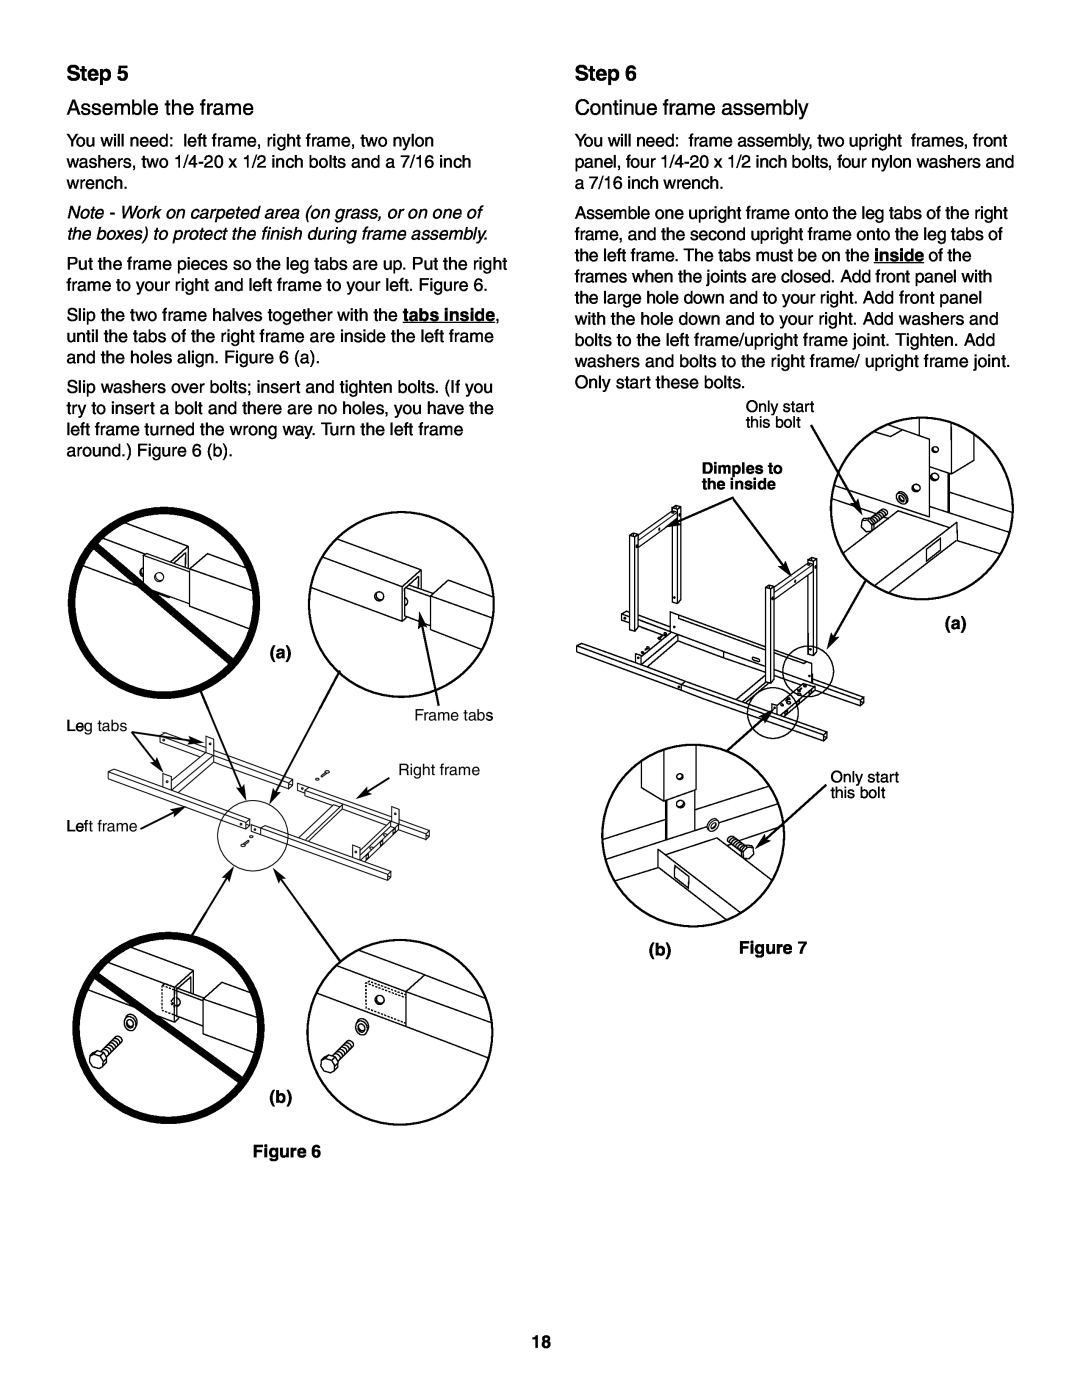 Weber 5500 owner manual Step, Assemble the frame, Continue frame assembly, b Figure 